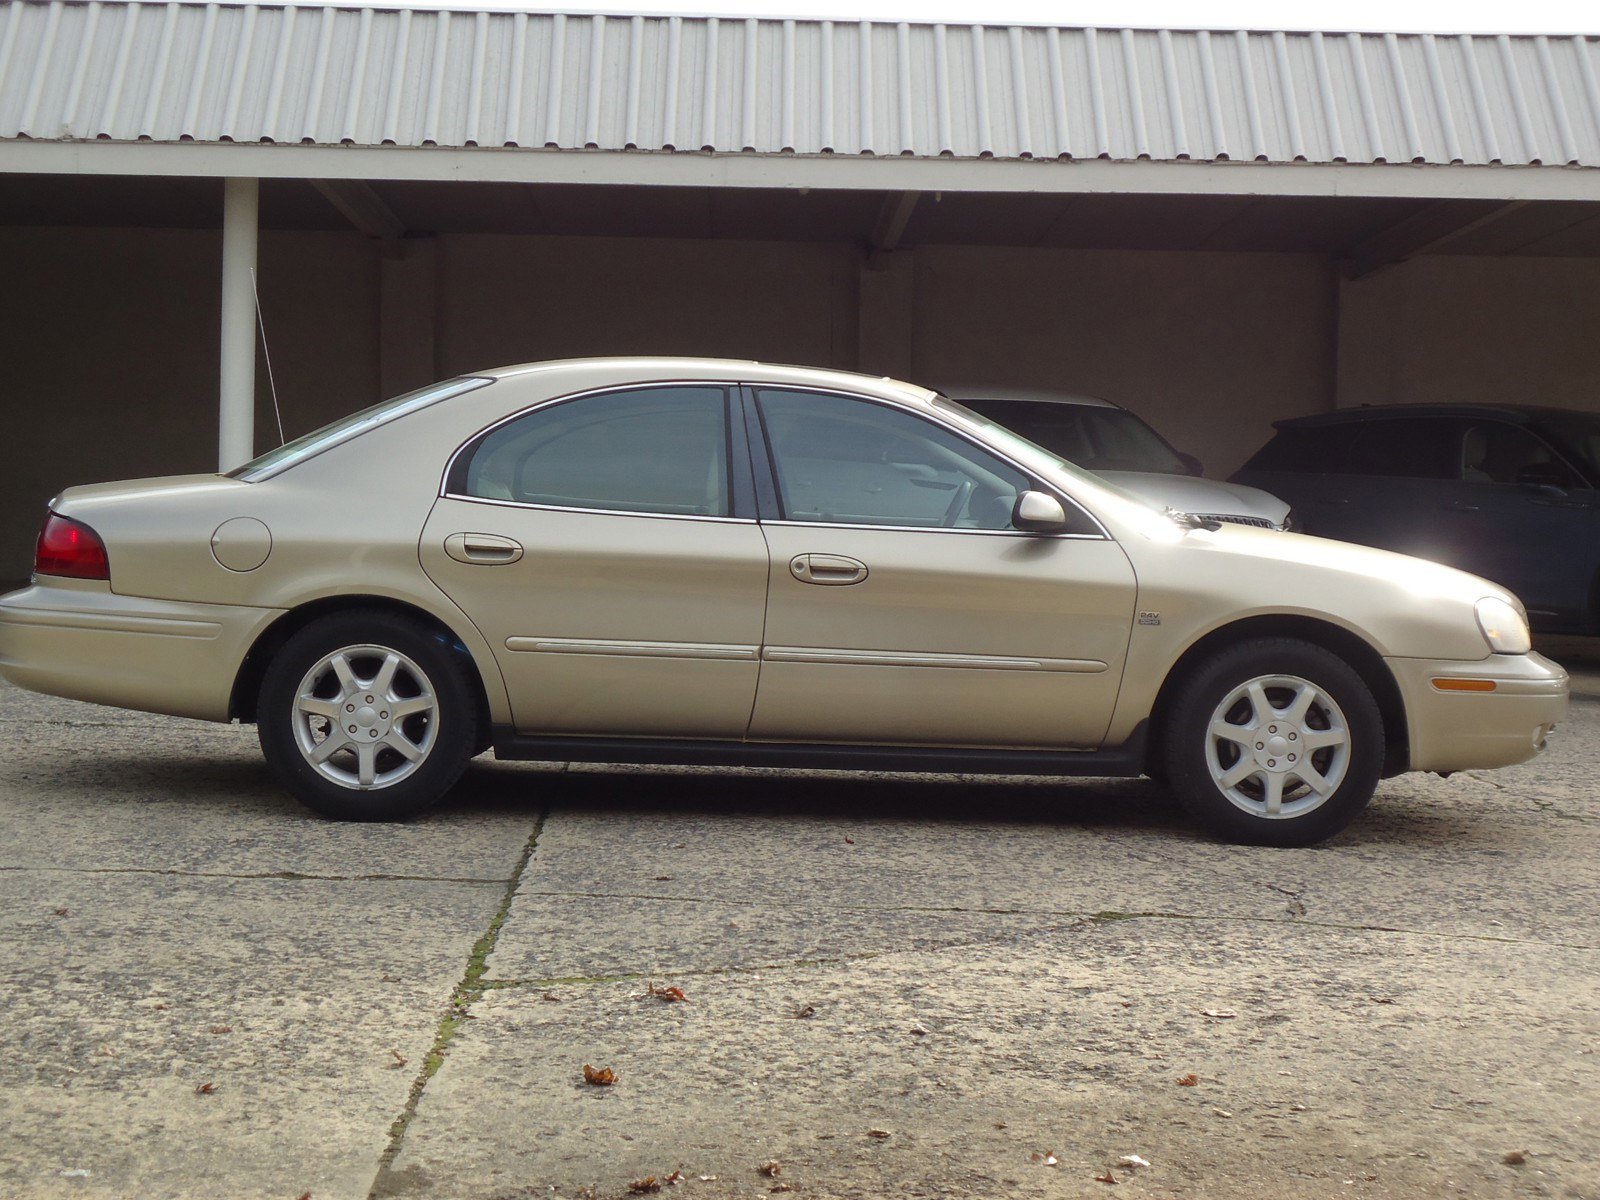 Used 2000 Mercury Sable LS Premium with VIN 1MEFM55S6YG629933 for sale in Chambersburg, PA